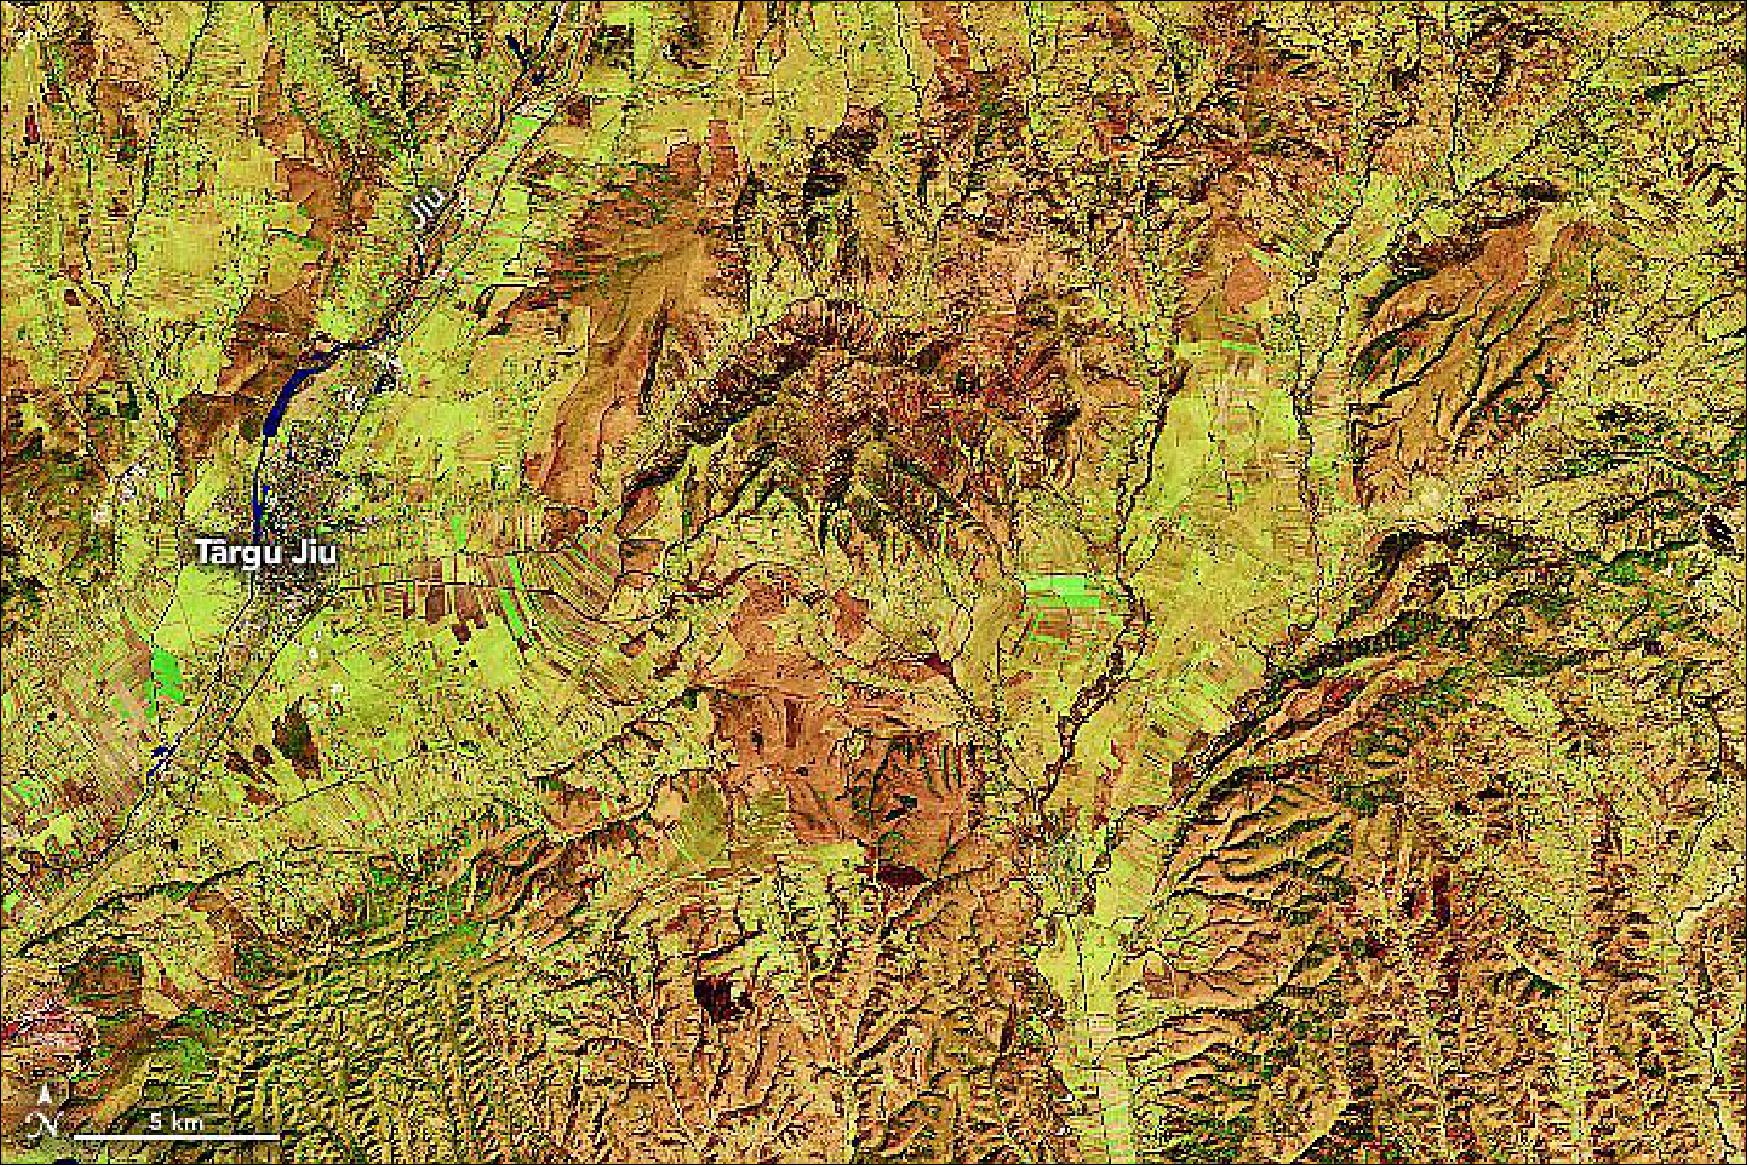 Figure 27: This image shows a detailed view of the foothills along the Jiu River. The gray patch on the river bank is Târgu Jiu, the capital city of Gorj County. Away from the city, long, narrow farms are generally laid out perpendicular to the rivers and streams. Orchards and vineyards are common across the hilly region, as is pastoral sheep farming (image credit: NASA Earth Observatory)